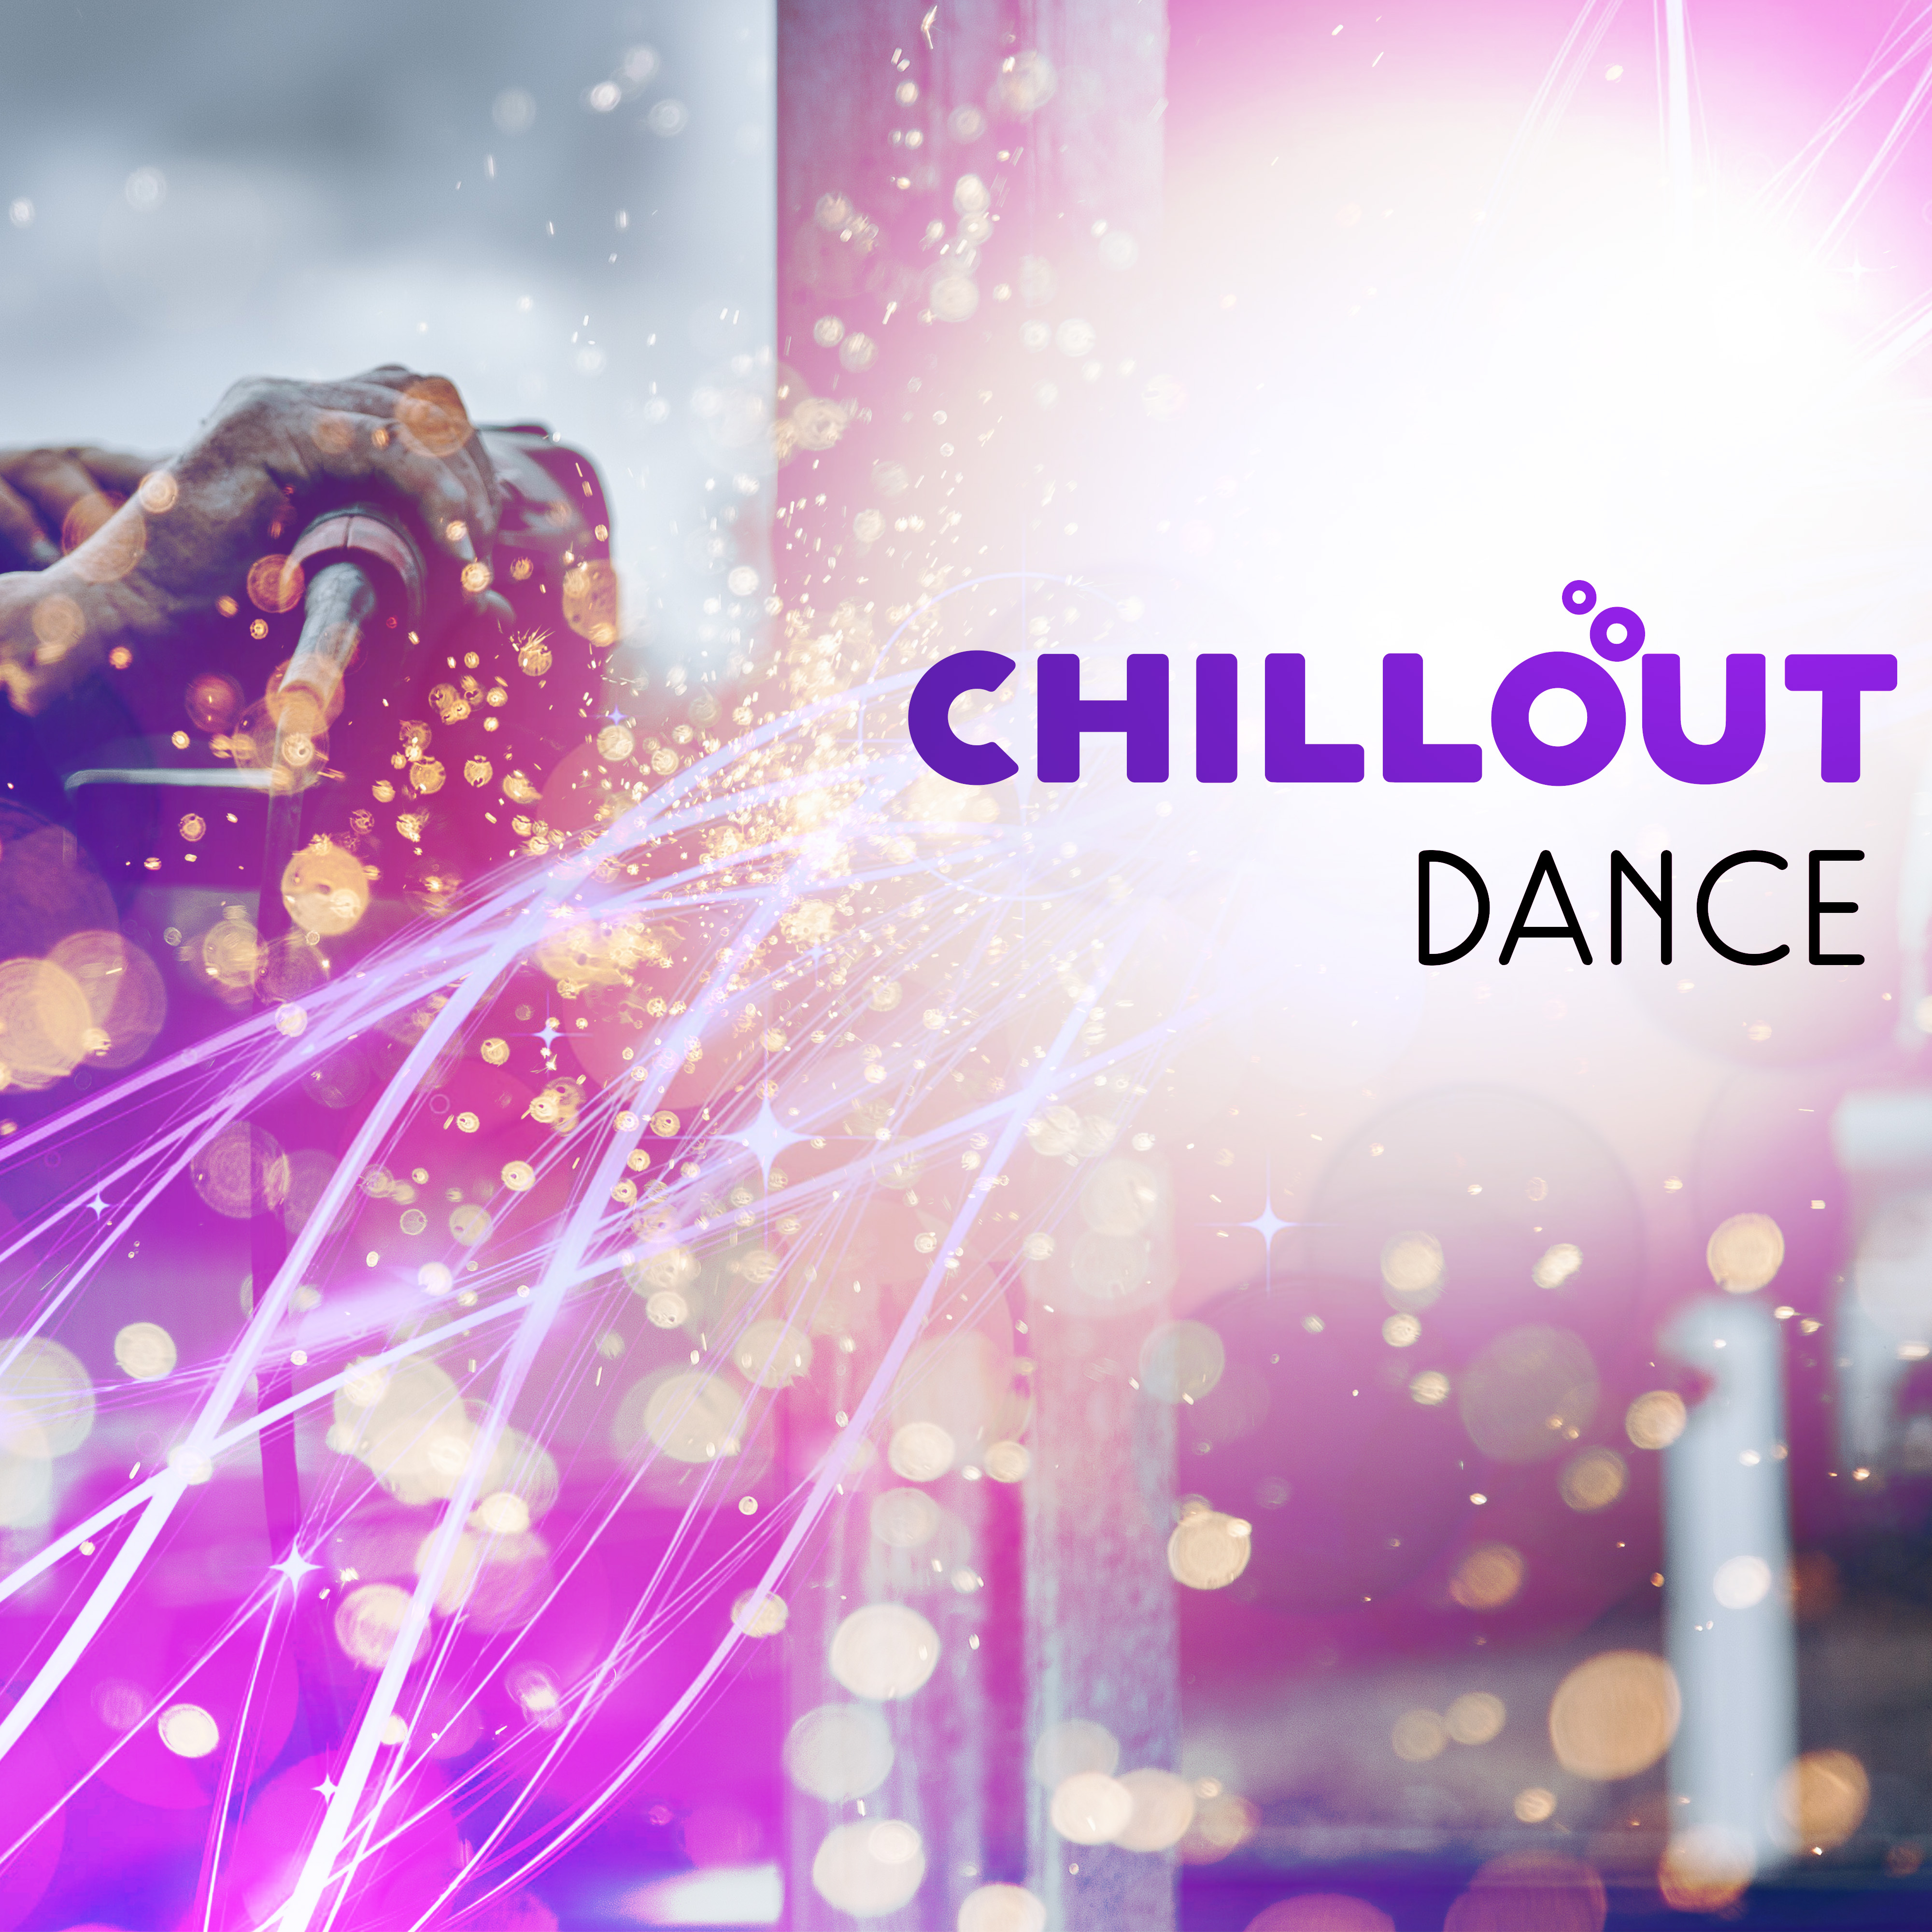 Chillout Dance  Party Hits, Chill Out Lounge, Summer 2017, Relax, Ibiza